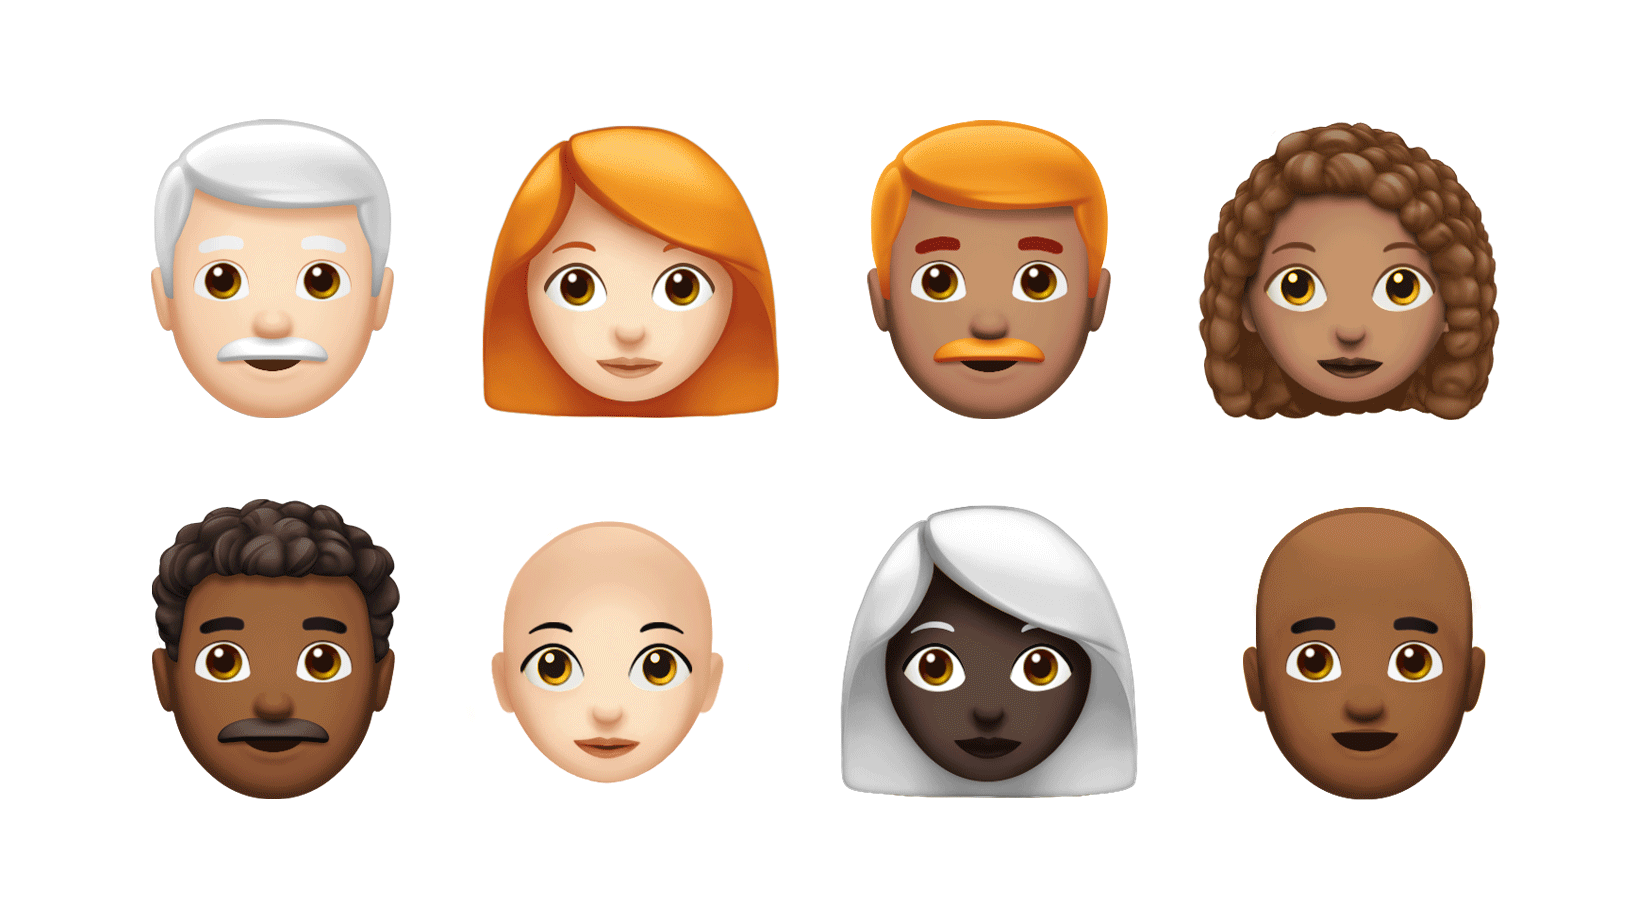 Two rows of new emoji designs, including ones with gray hair, red hair and curly hair.